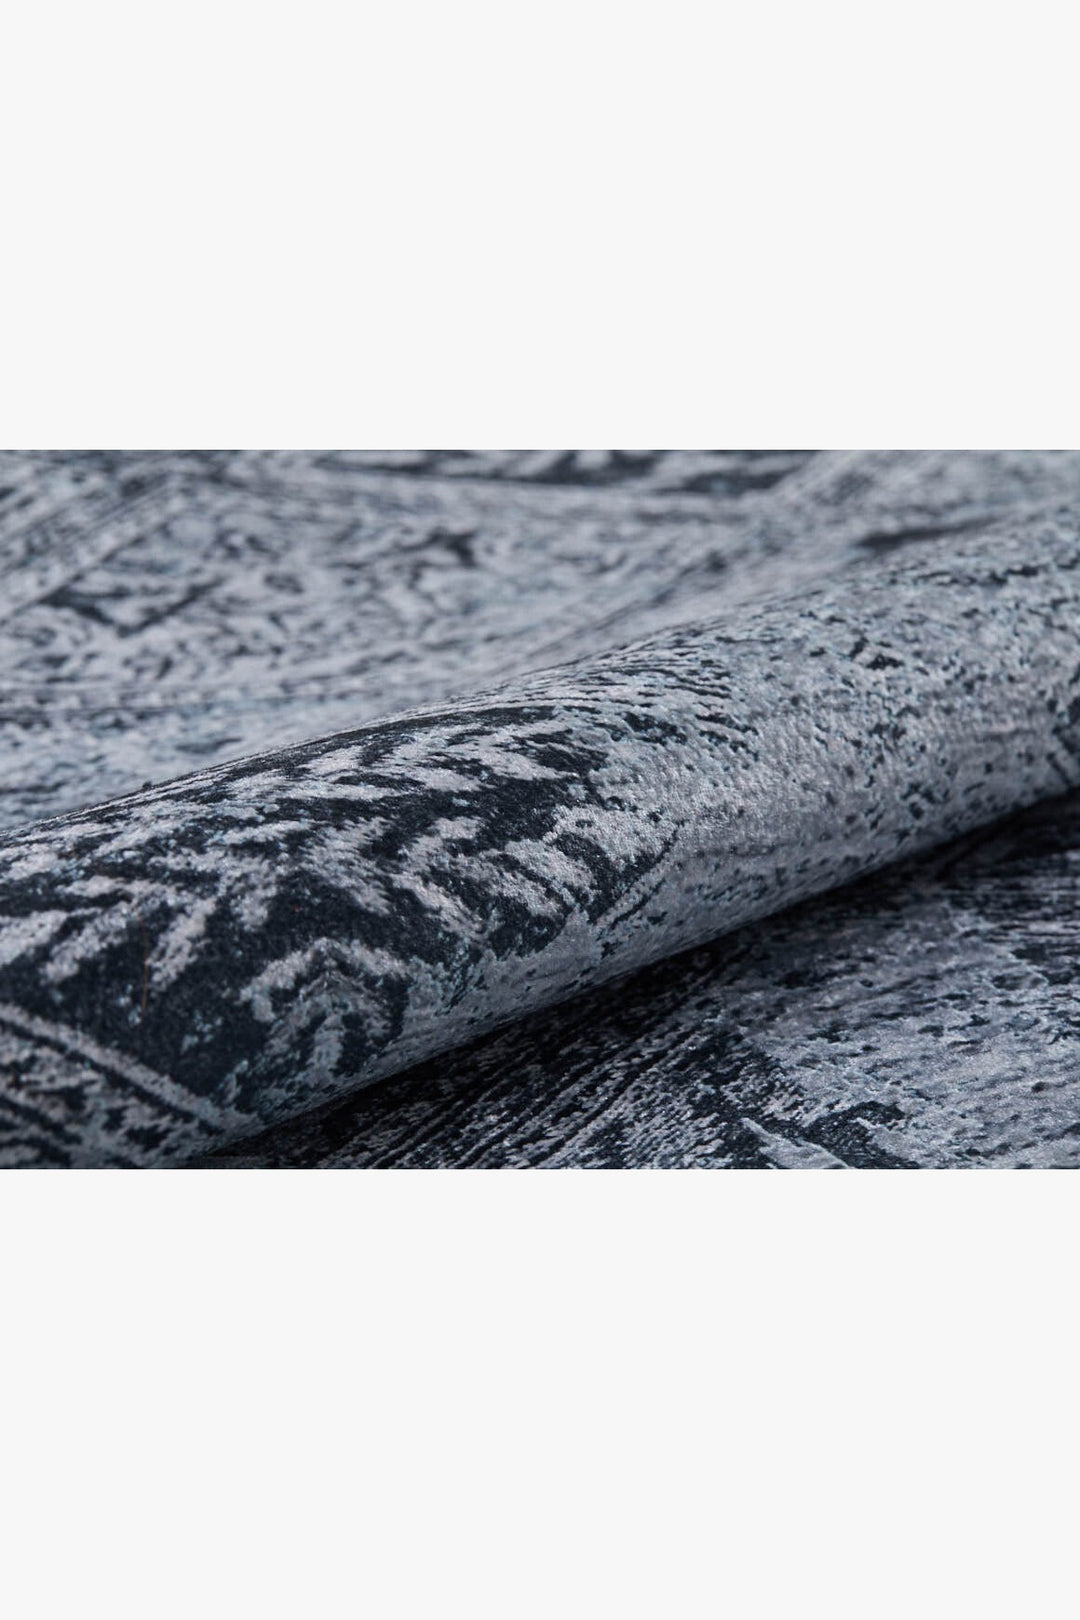 machine-washable-area-rug-Erased-Modern-Collection-Gray-Anthracite-JR1136